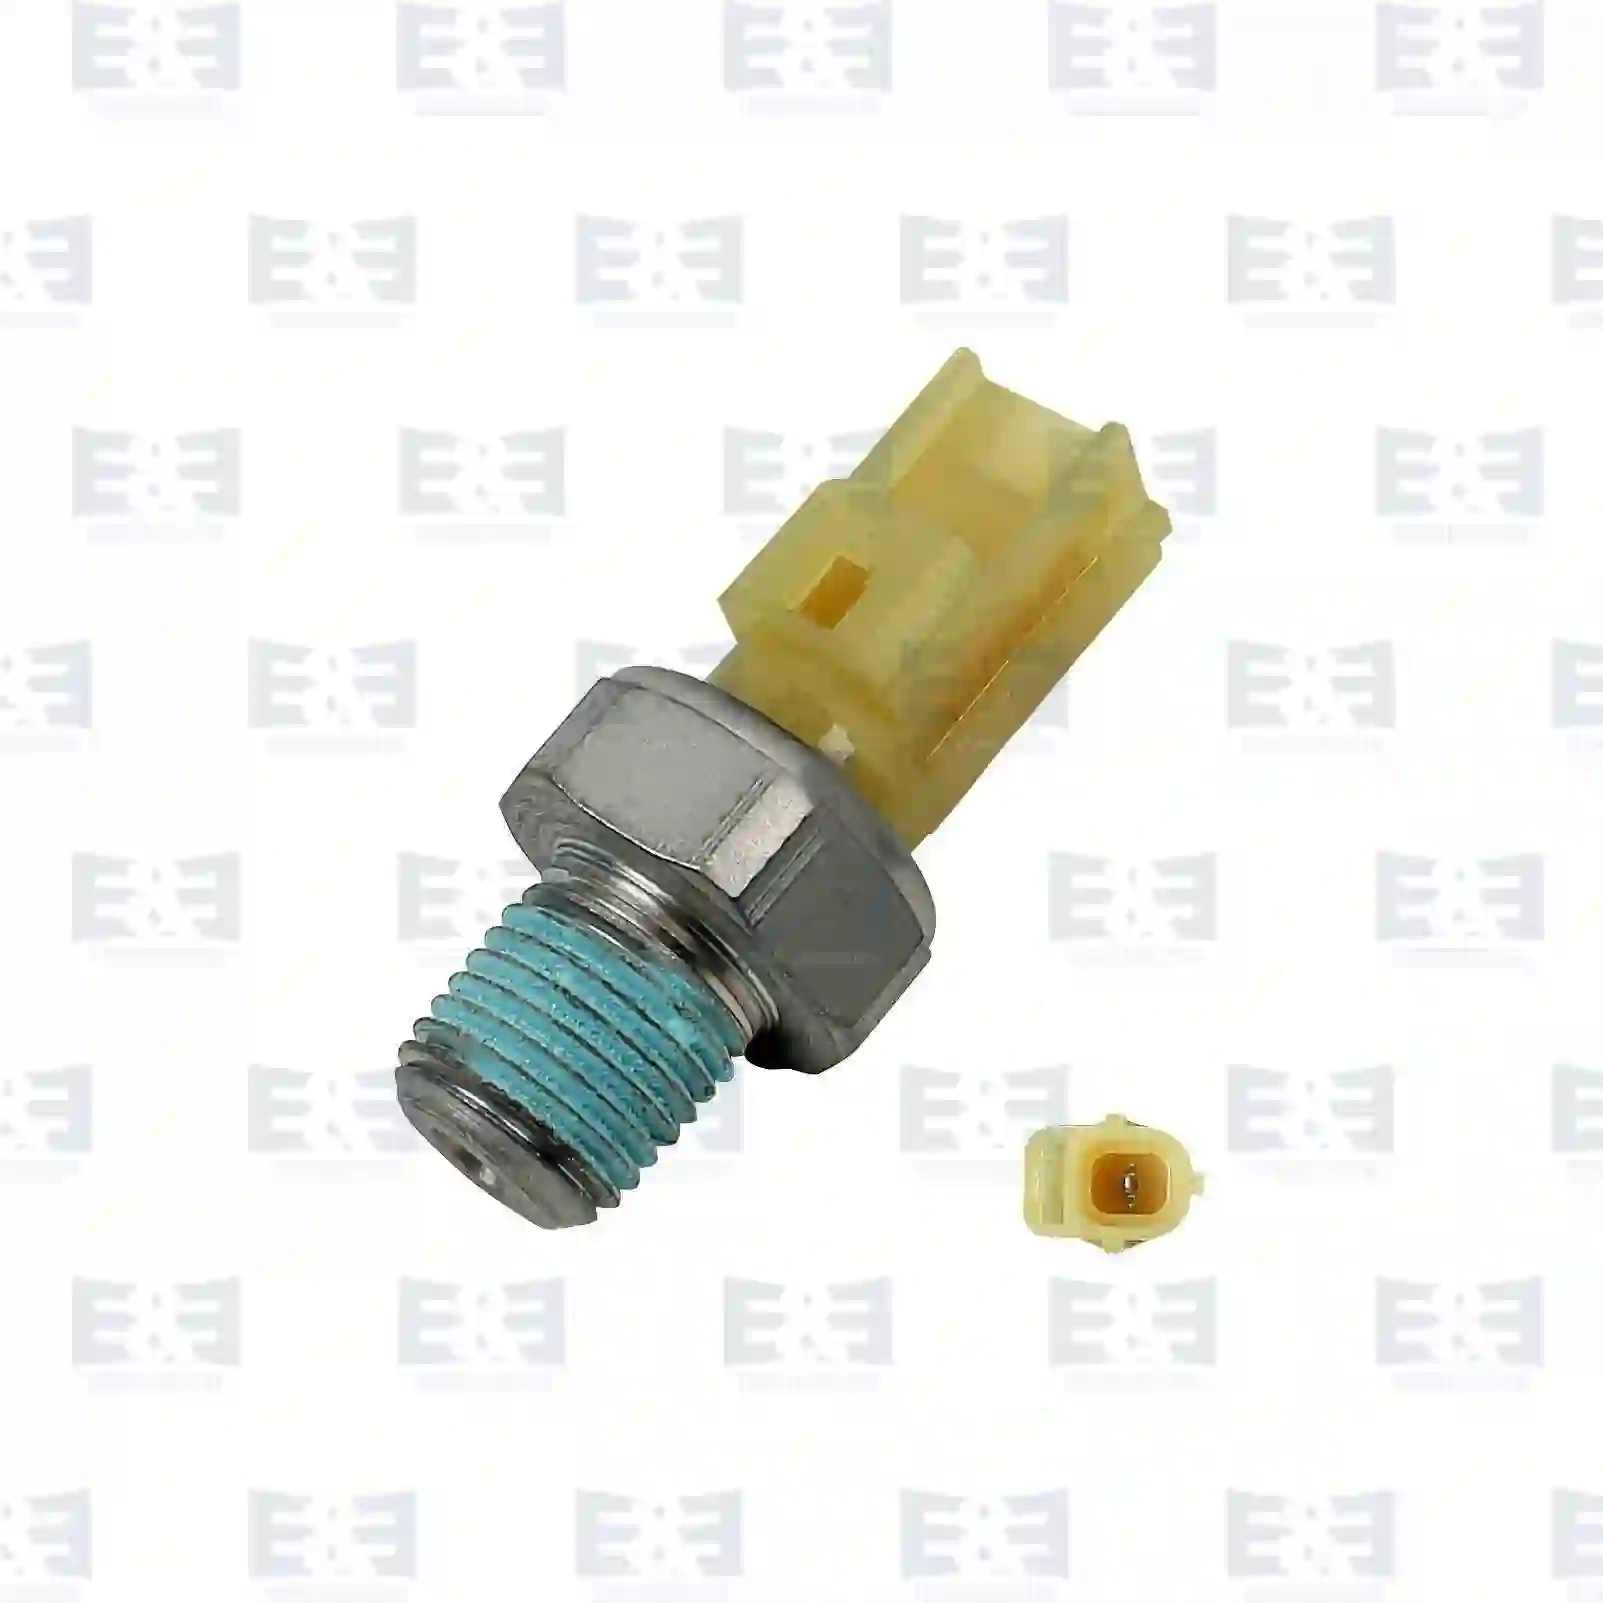 Oil pressure switch, 2E2200797, 1131J2, 9659173880, 1053881, 1053882, 1084764, 1095149, 1309298, 1363198, 3S71-9278-AB, 98AB-9278-AA, 98AB-9278-CA, 1131J2 ||  2E2200797 E&E Truck Spare Parts | Truck Spare Parts, Auotomotive Spare Parts Oil pressure switch, 2E2200797, 1131J2, 9659173880, 1053881, 1053882, 1084764, 1095149, 1309298, 1363198, 3S71-9278-AB, 98AB-9278-AA, 98AB-9278-CA, 1131J2 ||  2E2200797 E&E Truck Spare Parts | Truck Spare Parts, Auotomotive Spare Parts